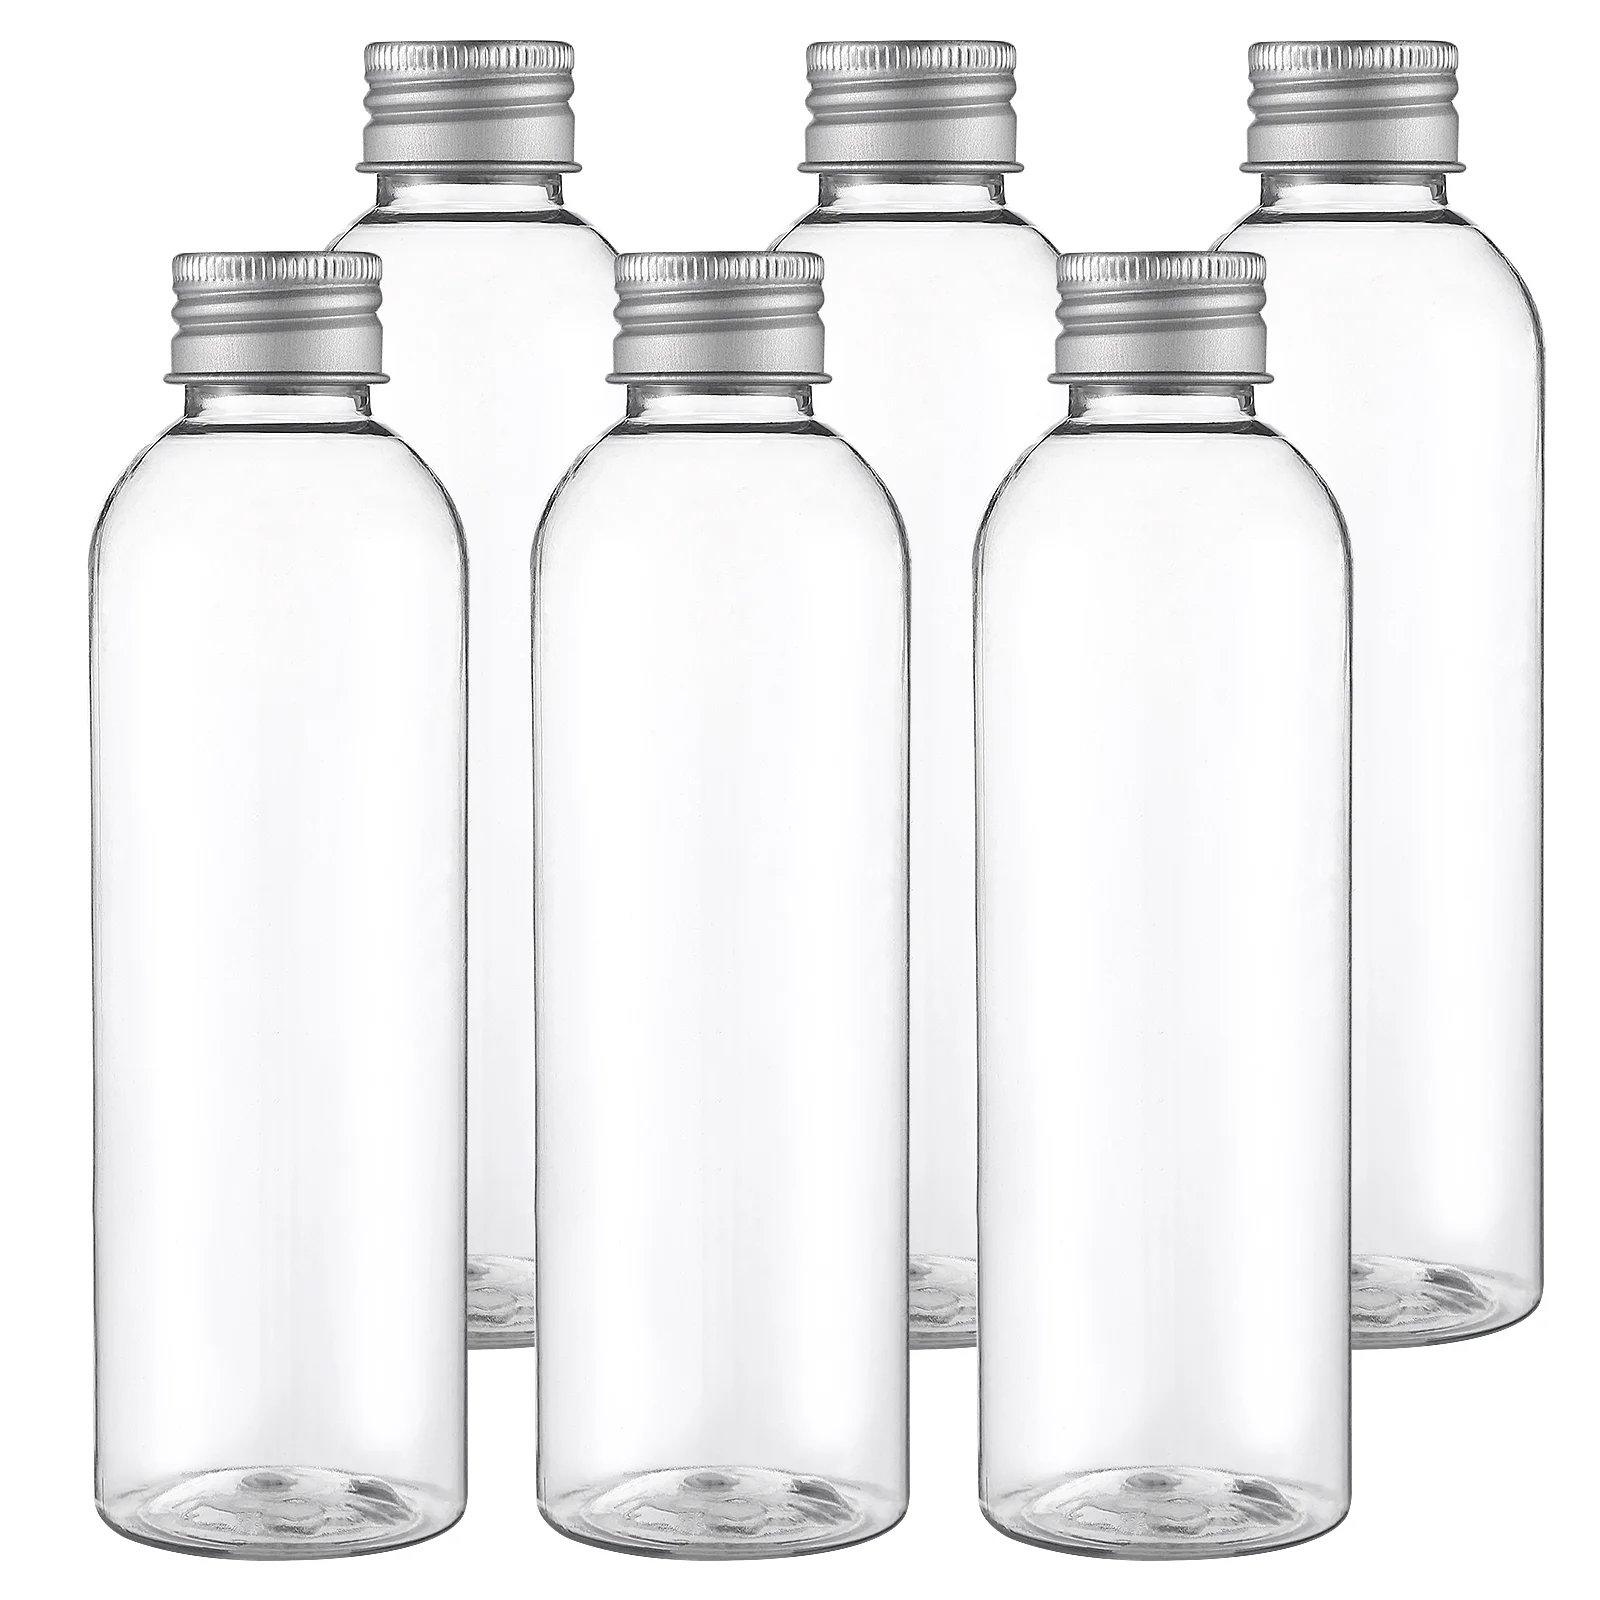 

6 Pcs Plastic Bottles Travel Toiletry Traveling Lotion Sample Refillable Toiletries Empty Shampoo Squeeze